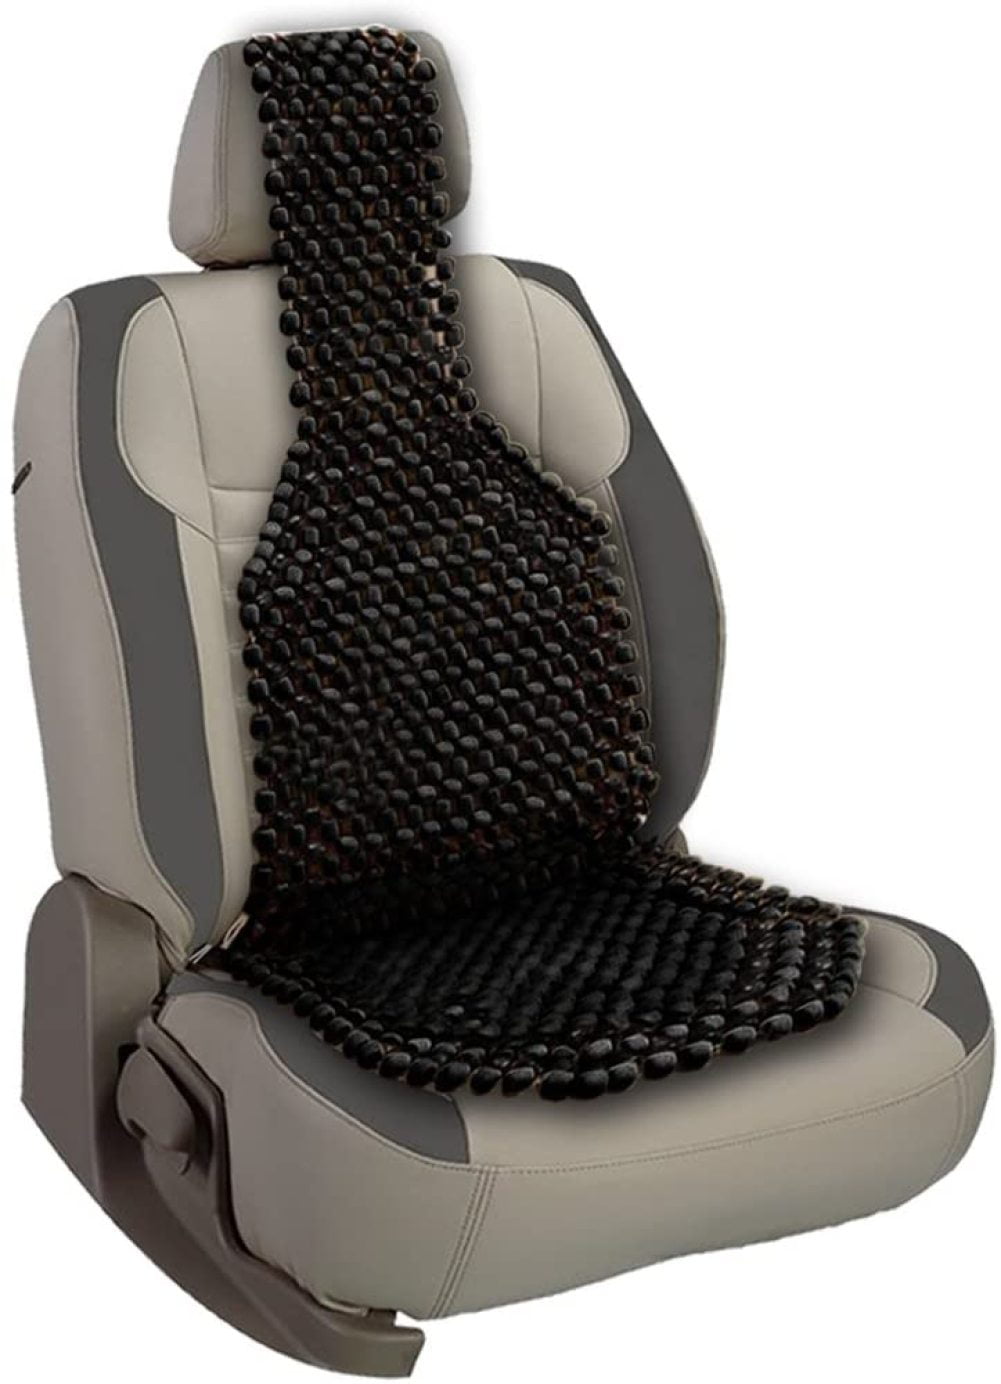 Wood Beaded Seat Cover Massaging Cool Cushion Wooden Bead Double Strung Cushion Massage Cushion Chair Cover For Universal Auto SUV Truck Office Home,2 Colors 